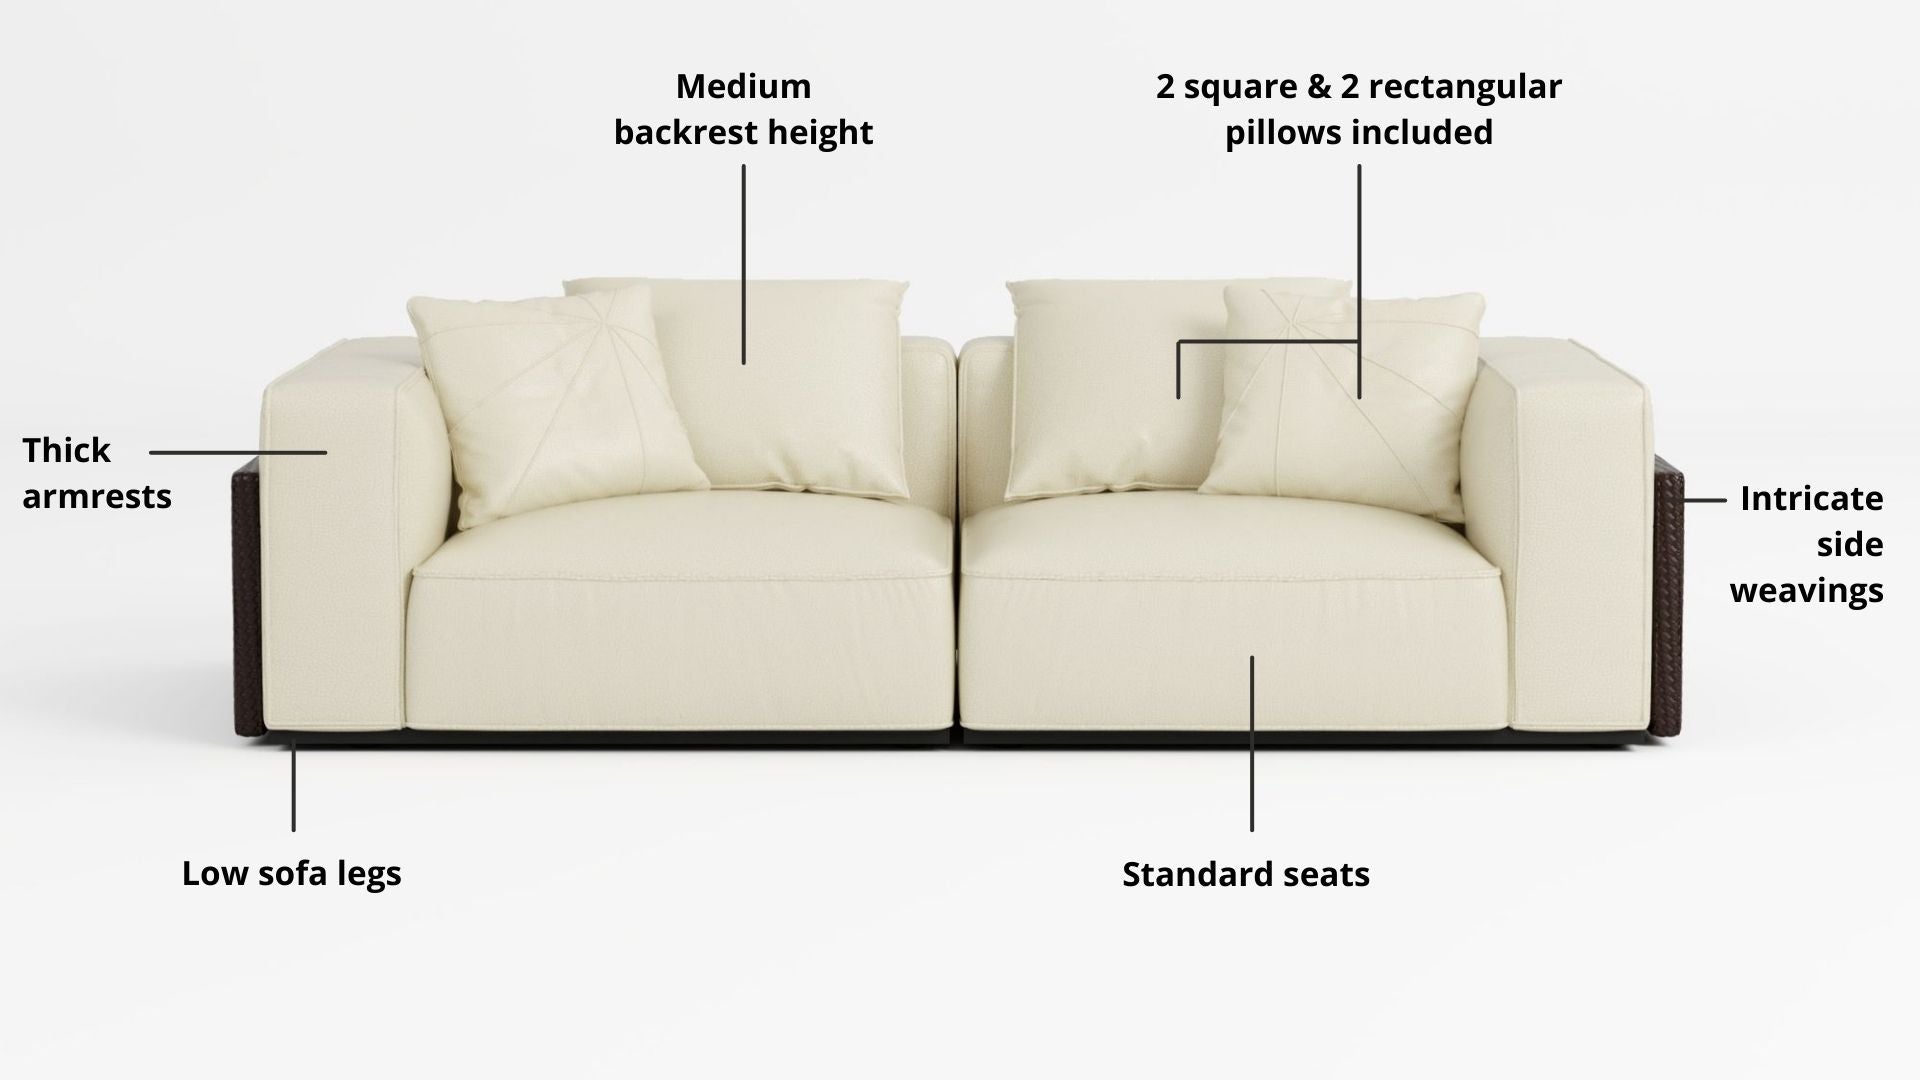 Key features such as armrest thickness, cushion height, seat depth and sofa leg height for Carson Half Leather Sofa